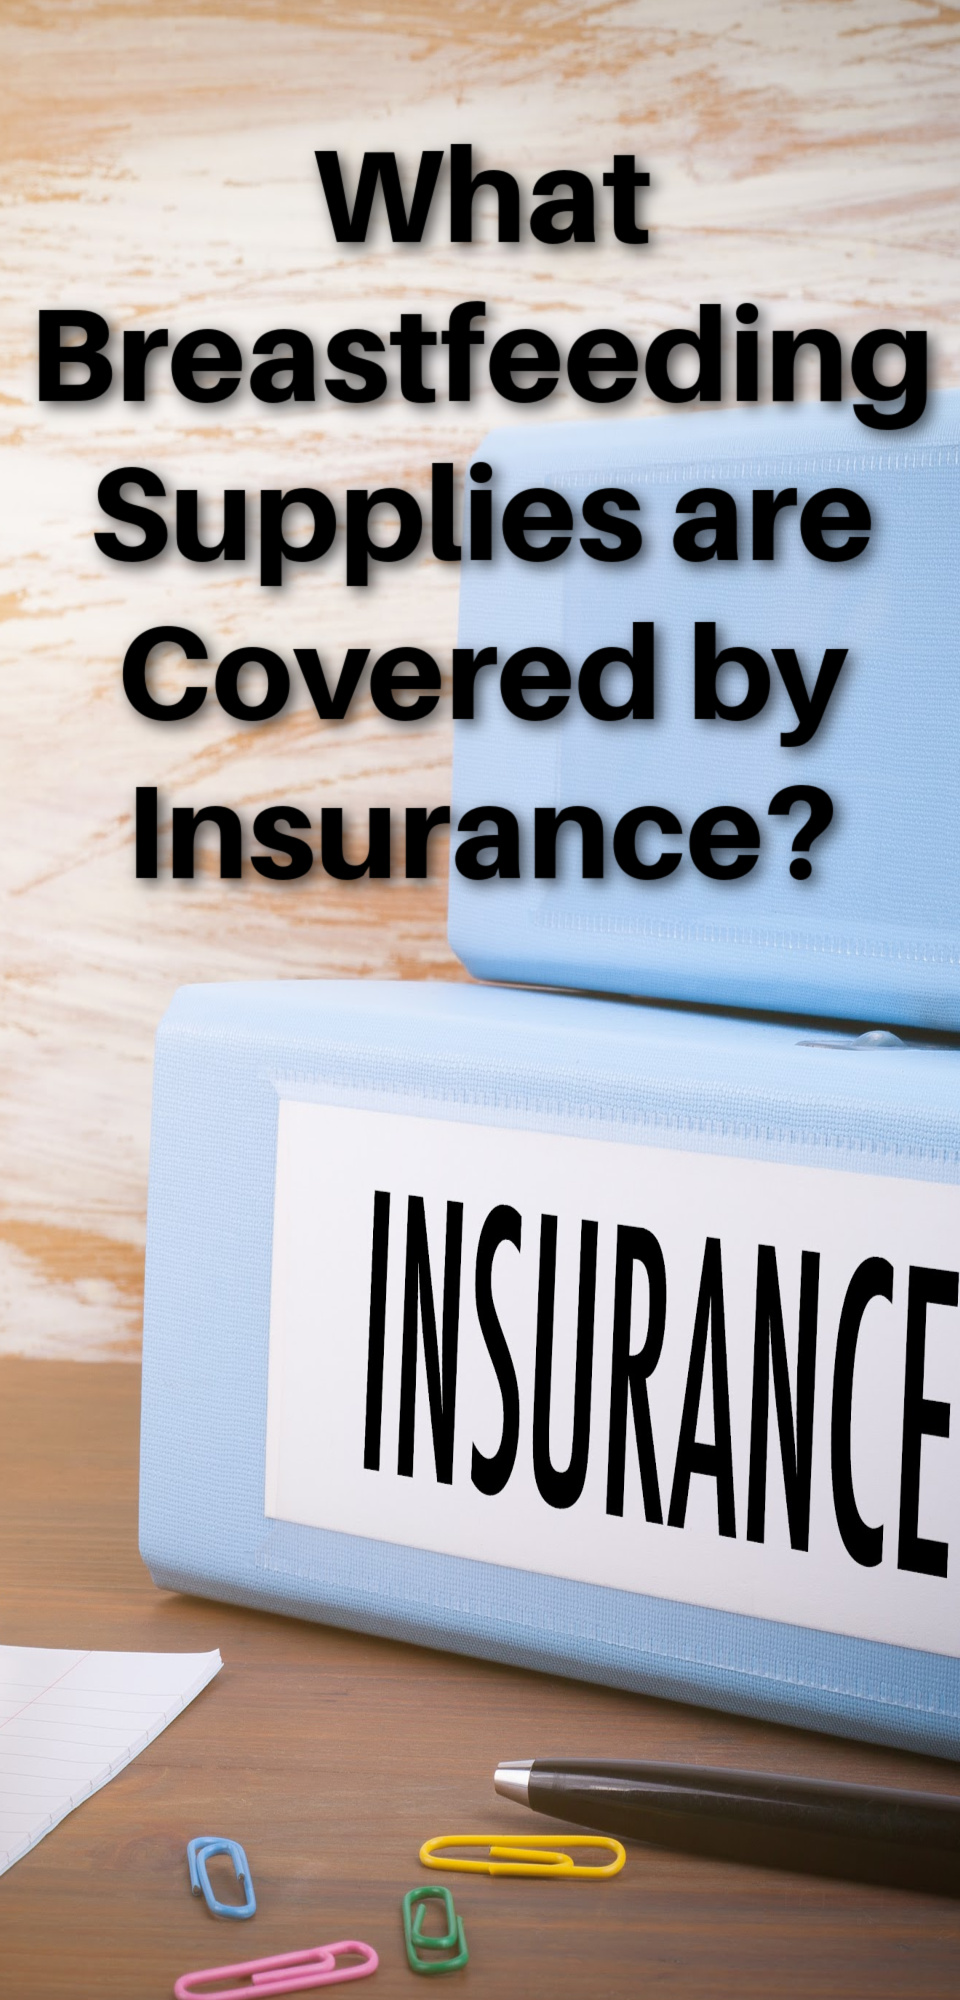 What Breastfeeding Supplies Are Covered By Insurance?